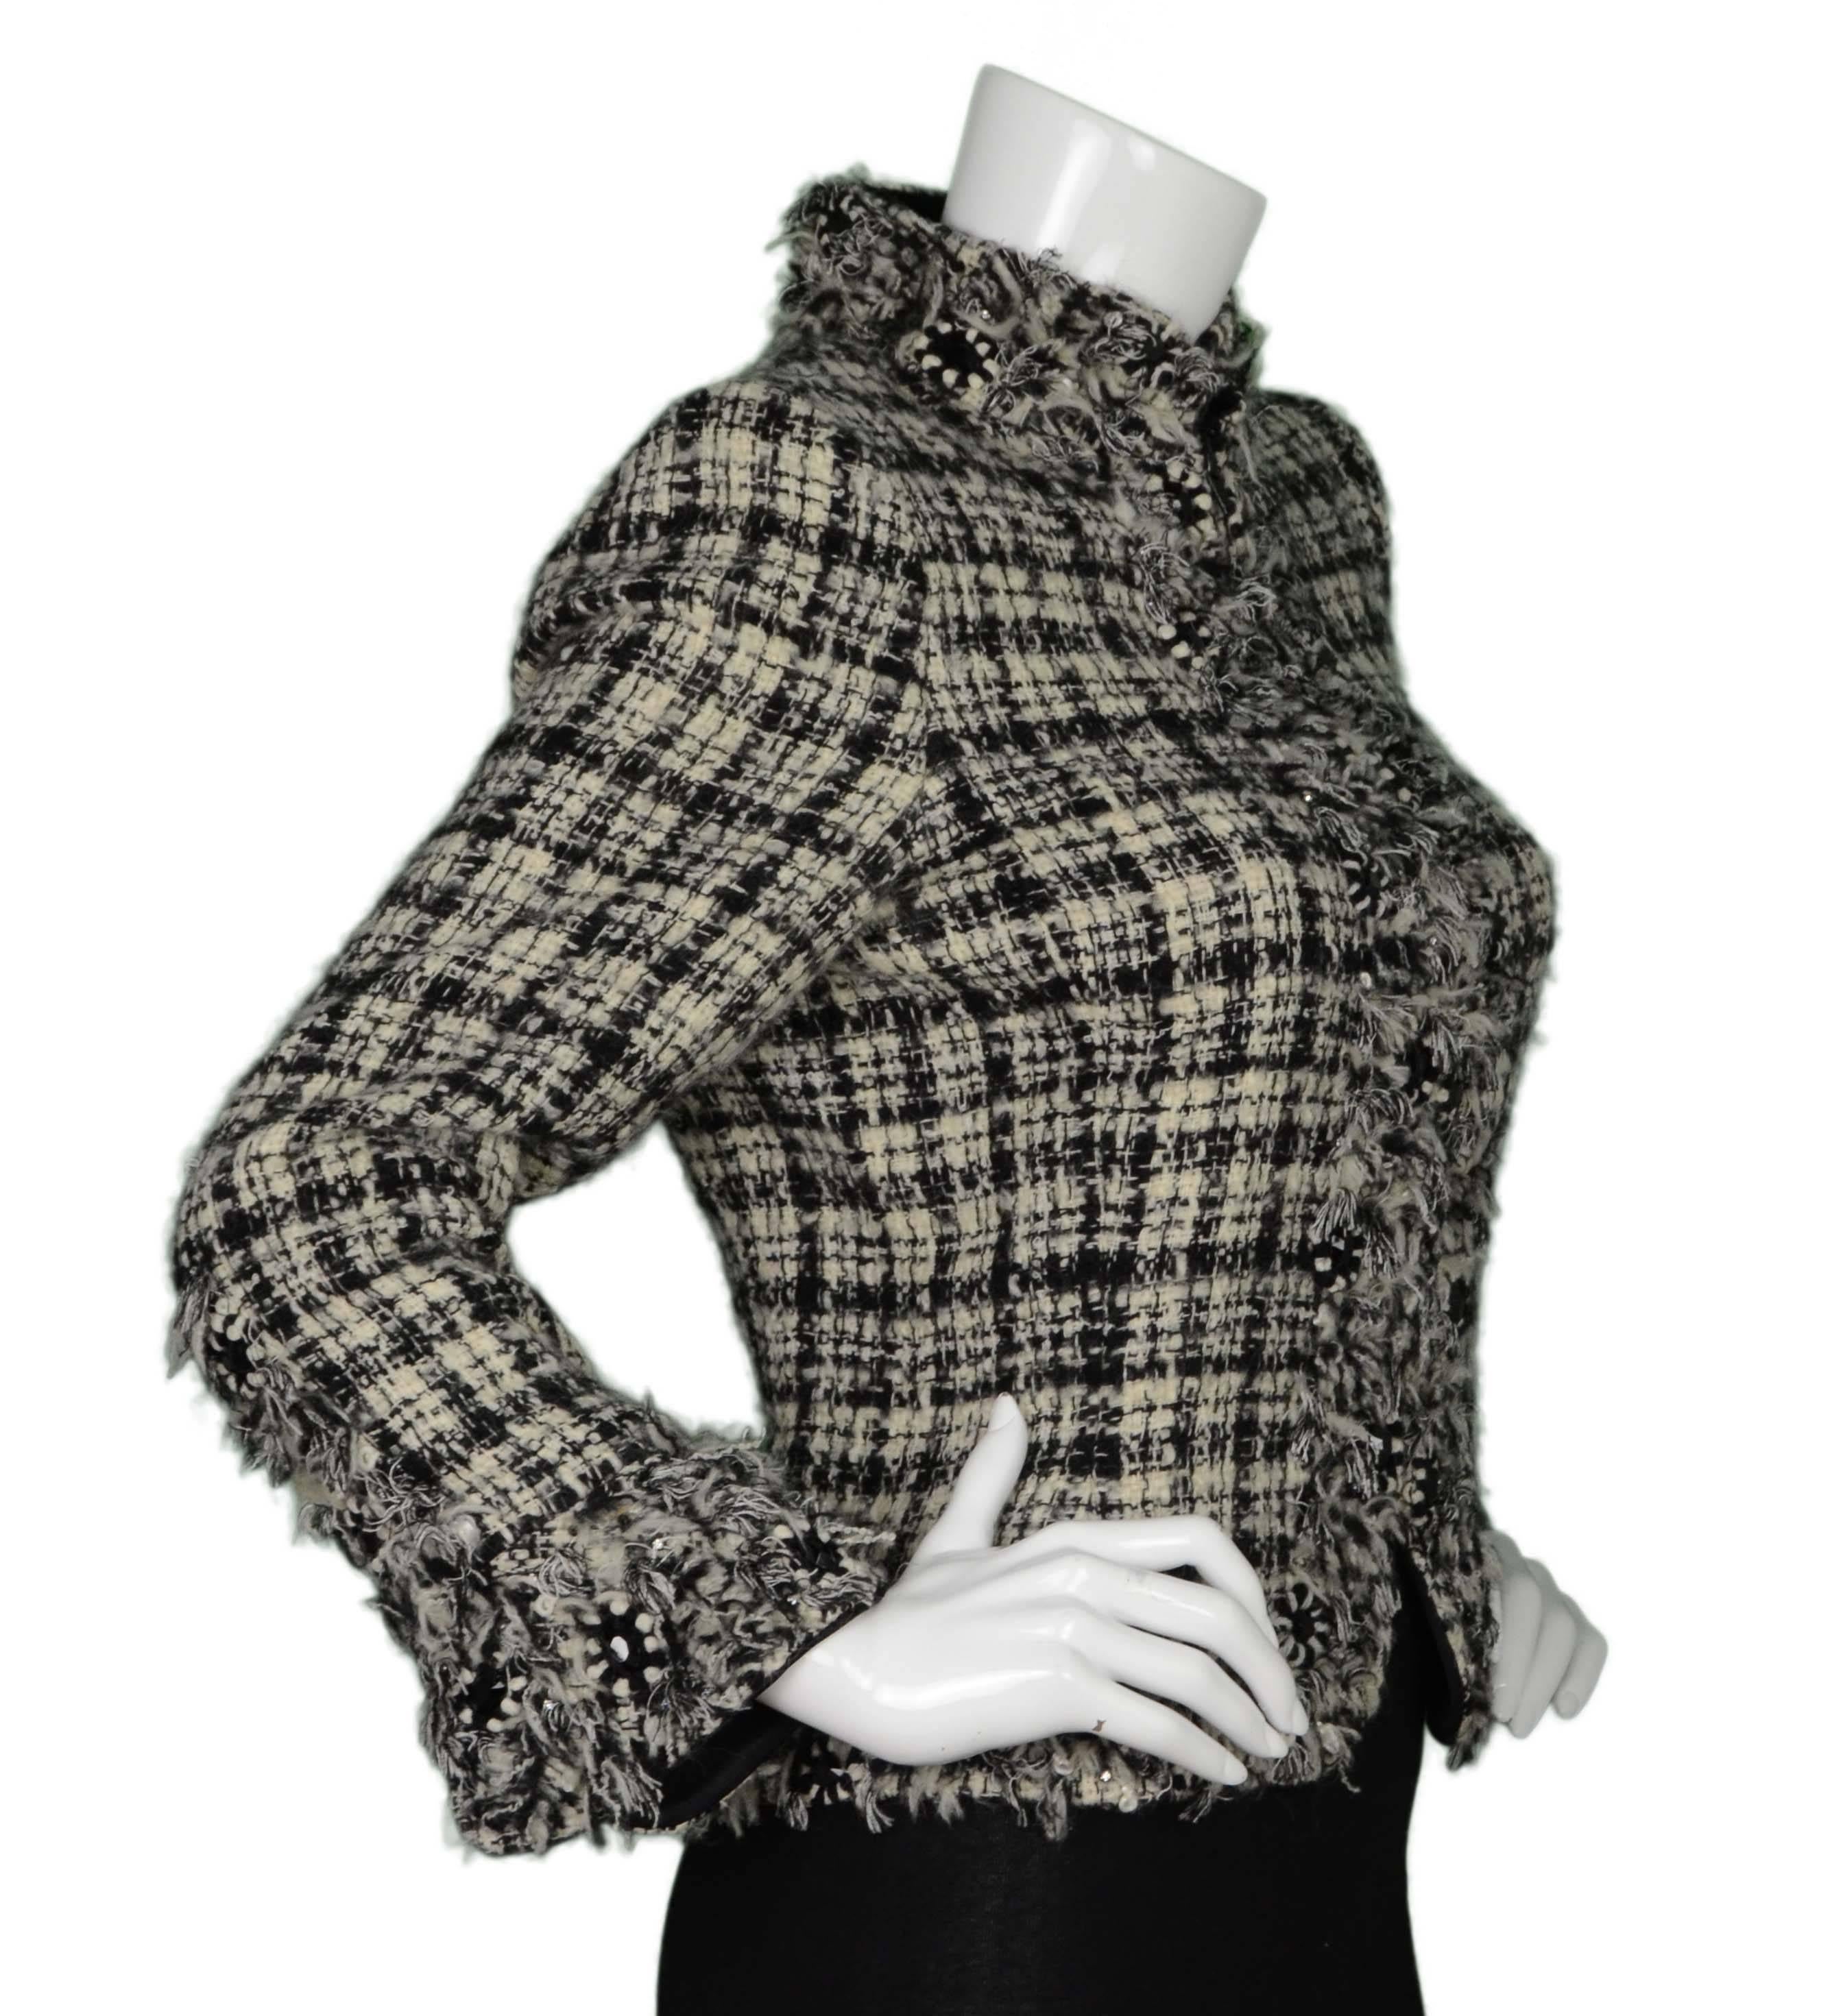 Oscar de la Renta Black & White Tweed Jacket 
Features black beads and fringe throughout trim
Made In: Italy
Color: Black and white
Composition: 86% wool, 10% mohair, 4% polyamide
Lining: Navy satin-blend textile
Closure/Opening: Zip front